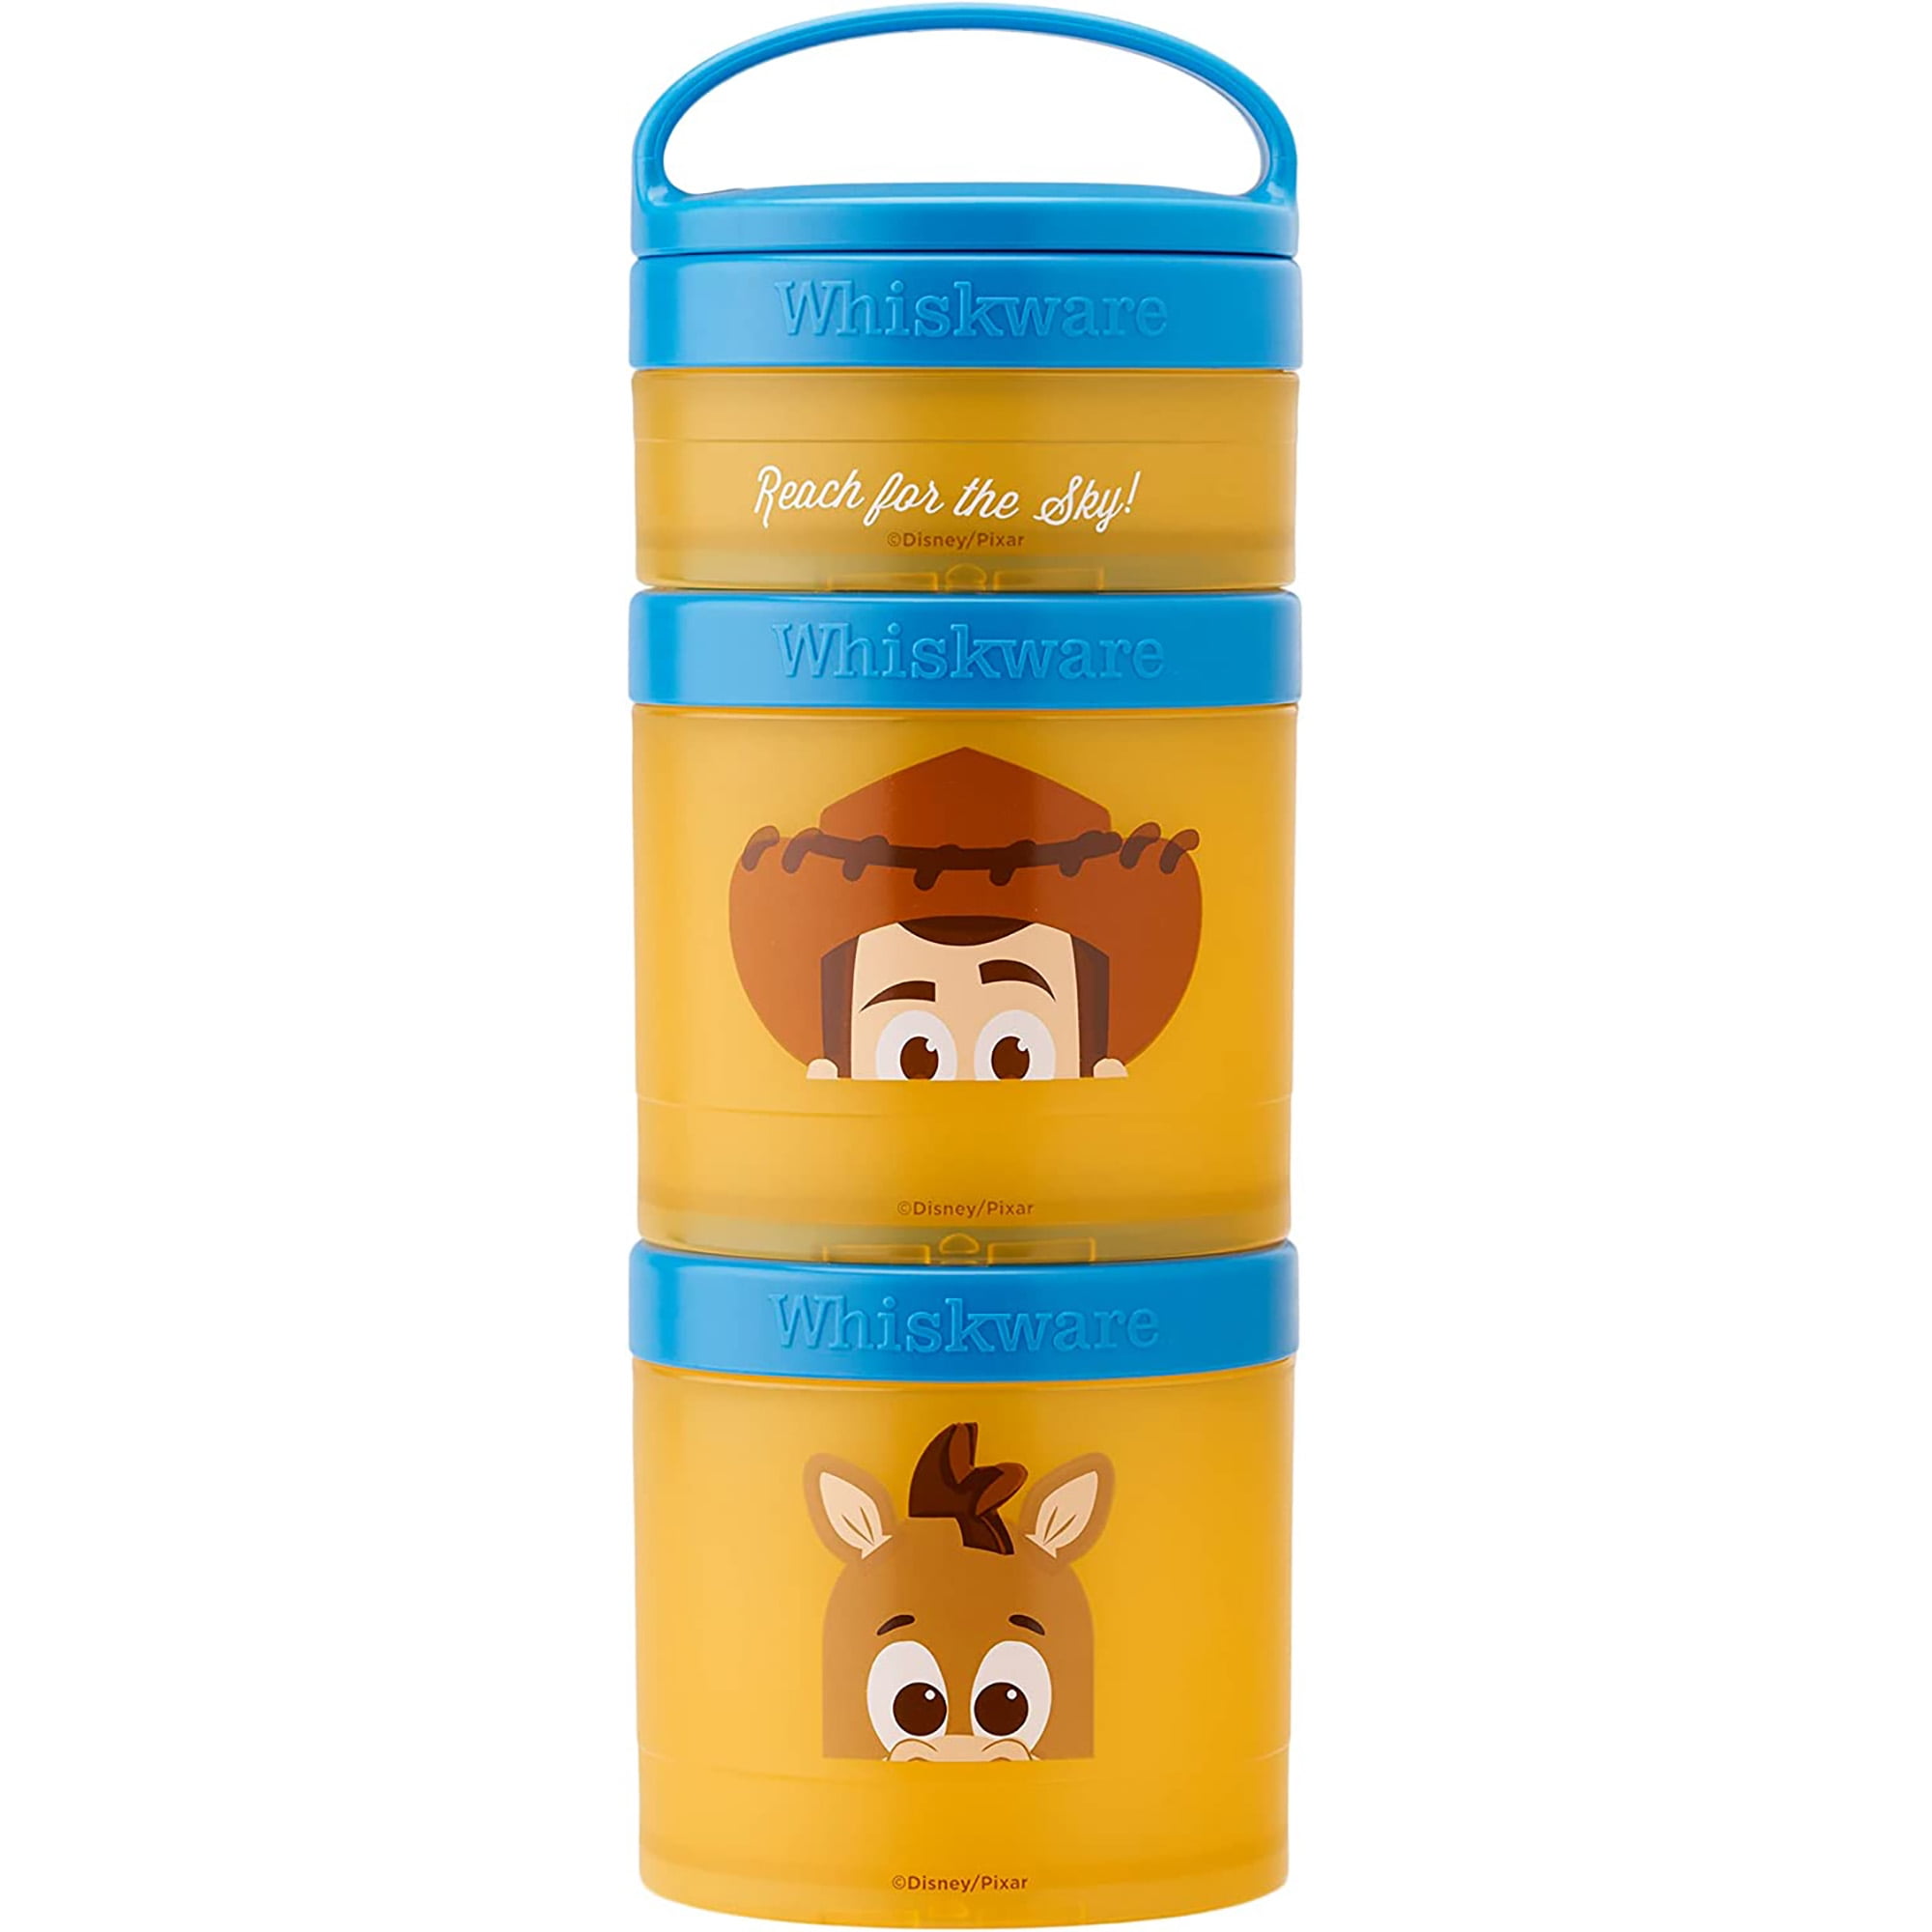 Whiskware Pixar Stackable Snack Pack Containers - Cars 